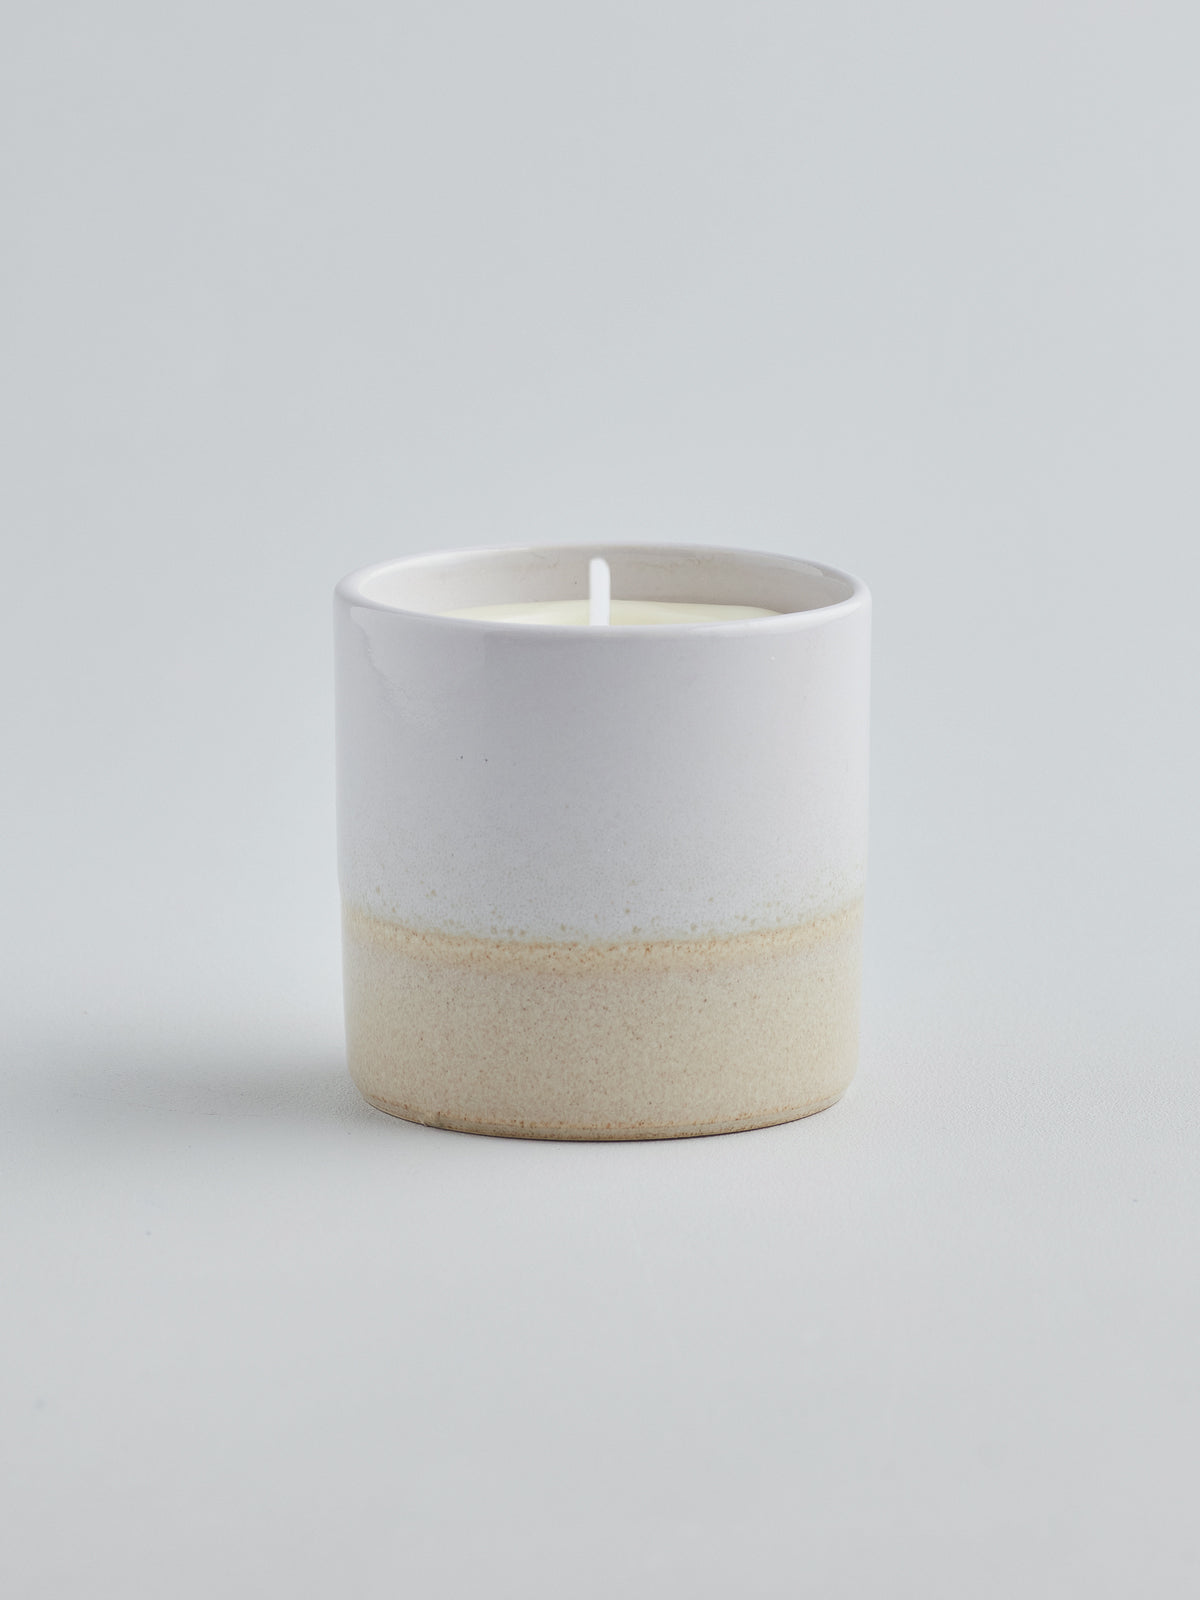 St. Eval Sea & Shore Candle Pot - Tranquility